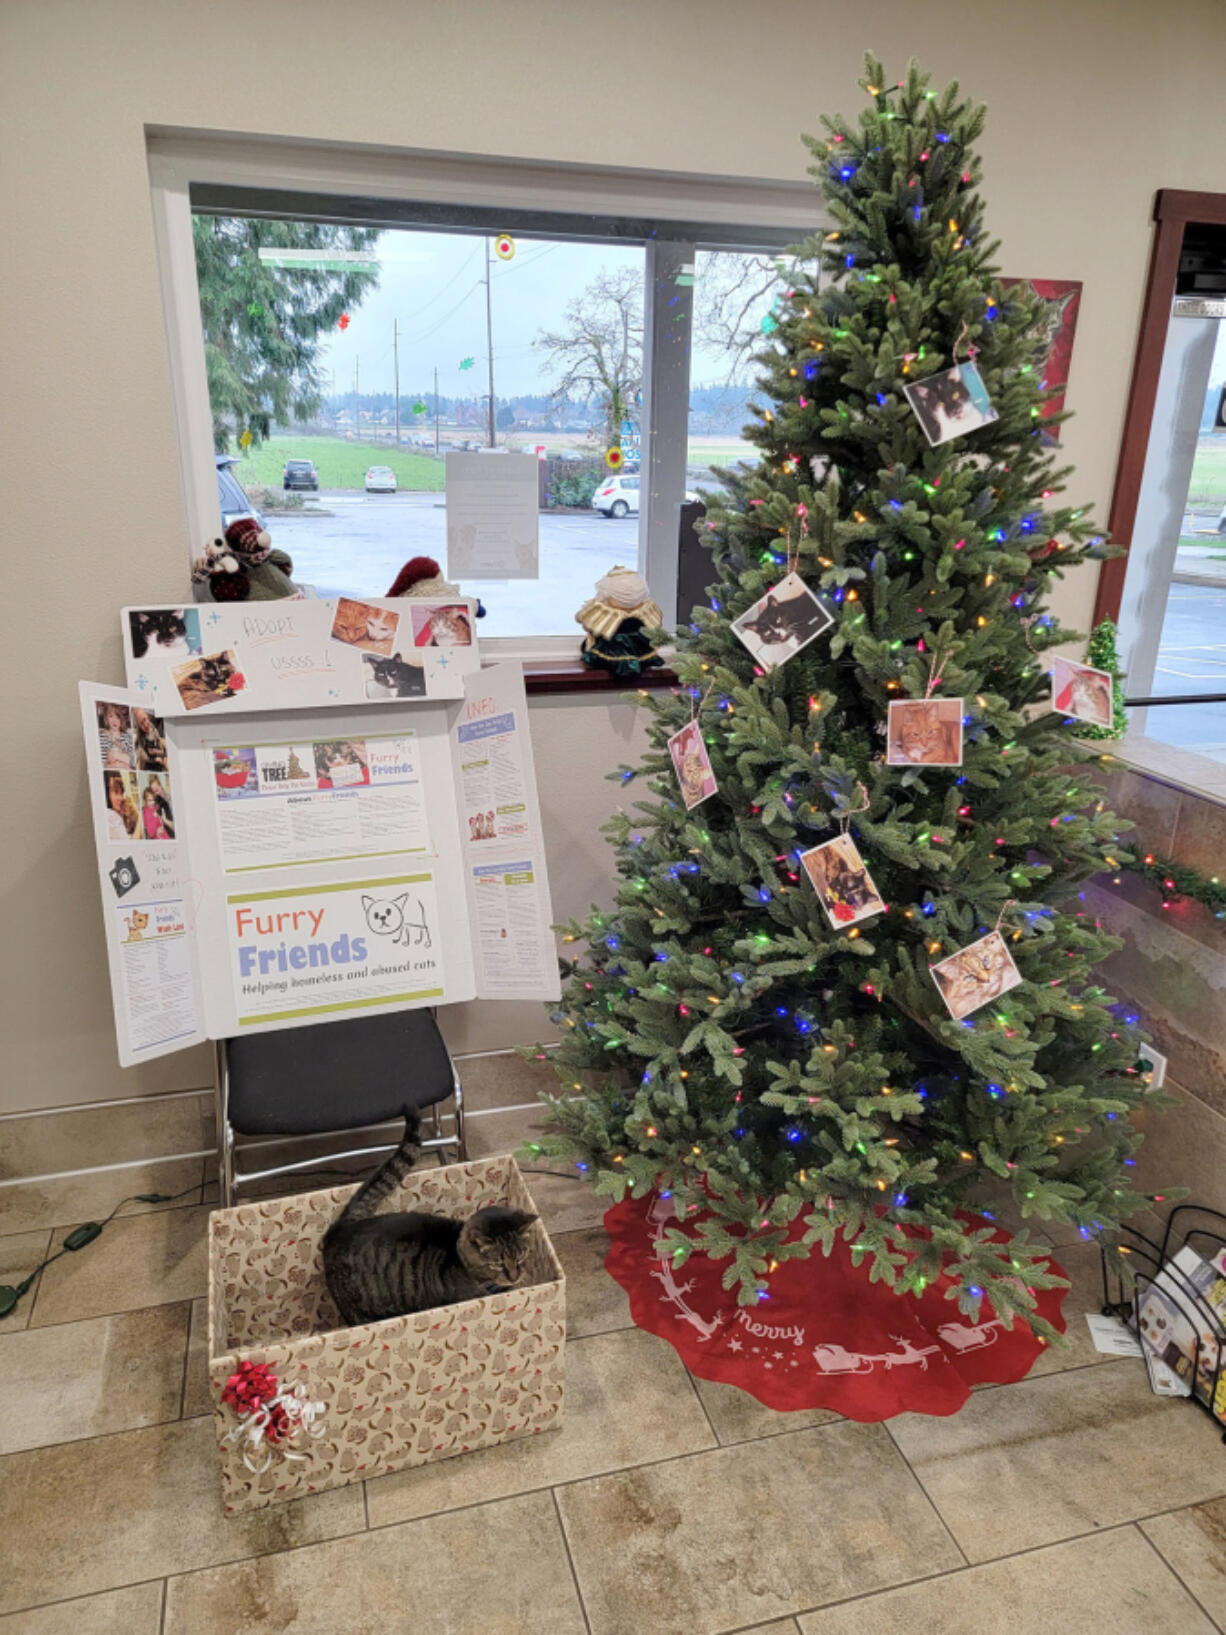 Several businesses hosted special Giving Trees during the month of December to help support cats and kittens in local shelters as part of Furry Friends' annual Giving Tree charity event.